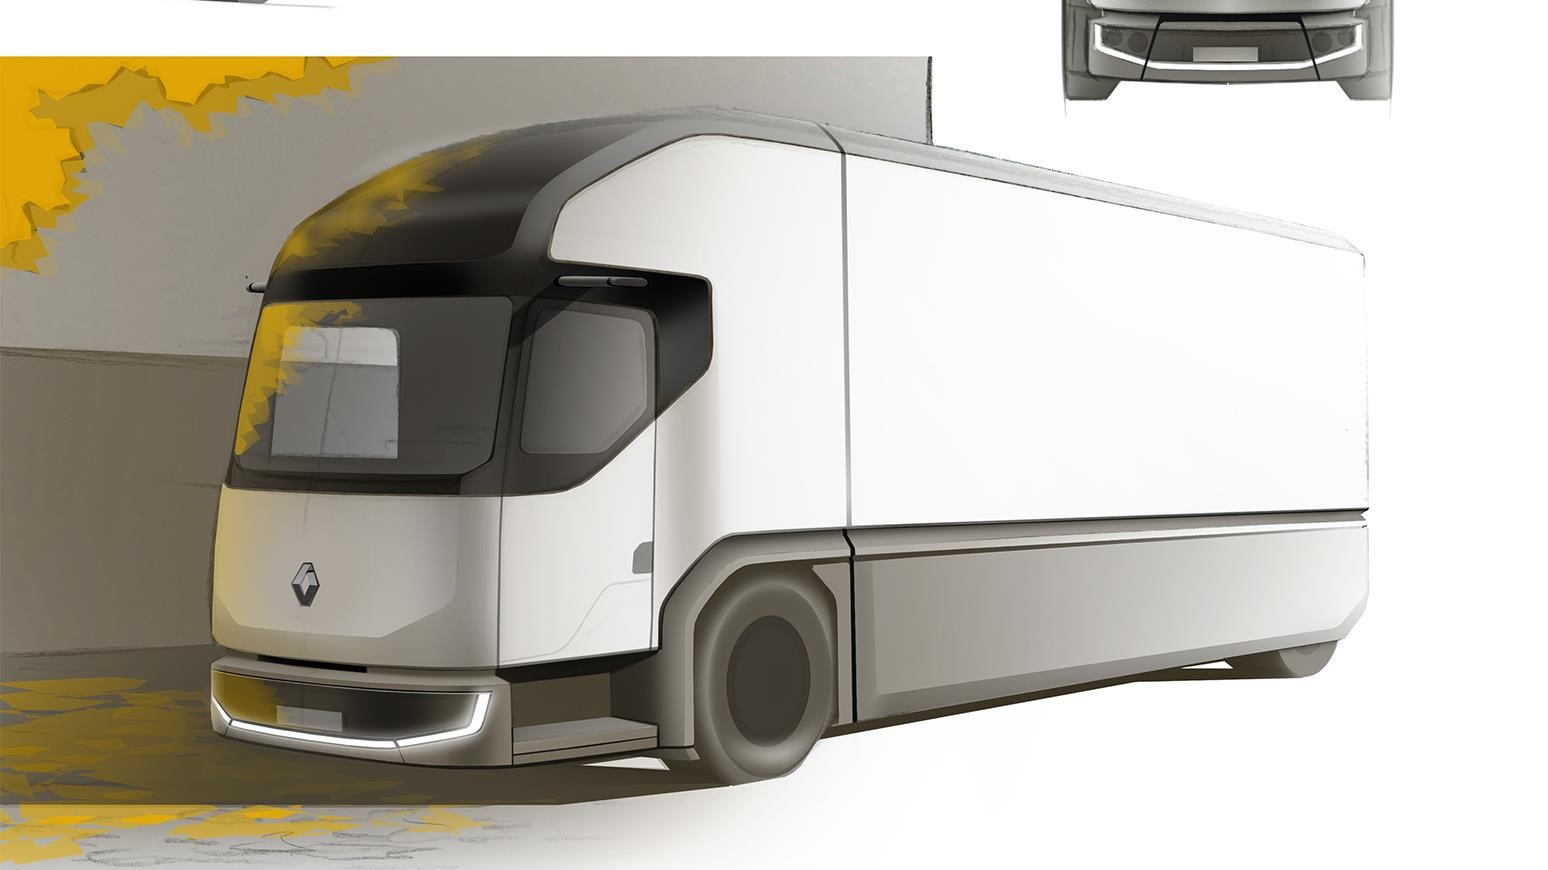 Renault & GEODIS Developing 16-Tonne Electric Truck For Urban Logistics